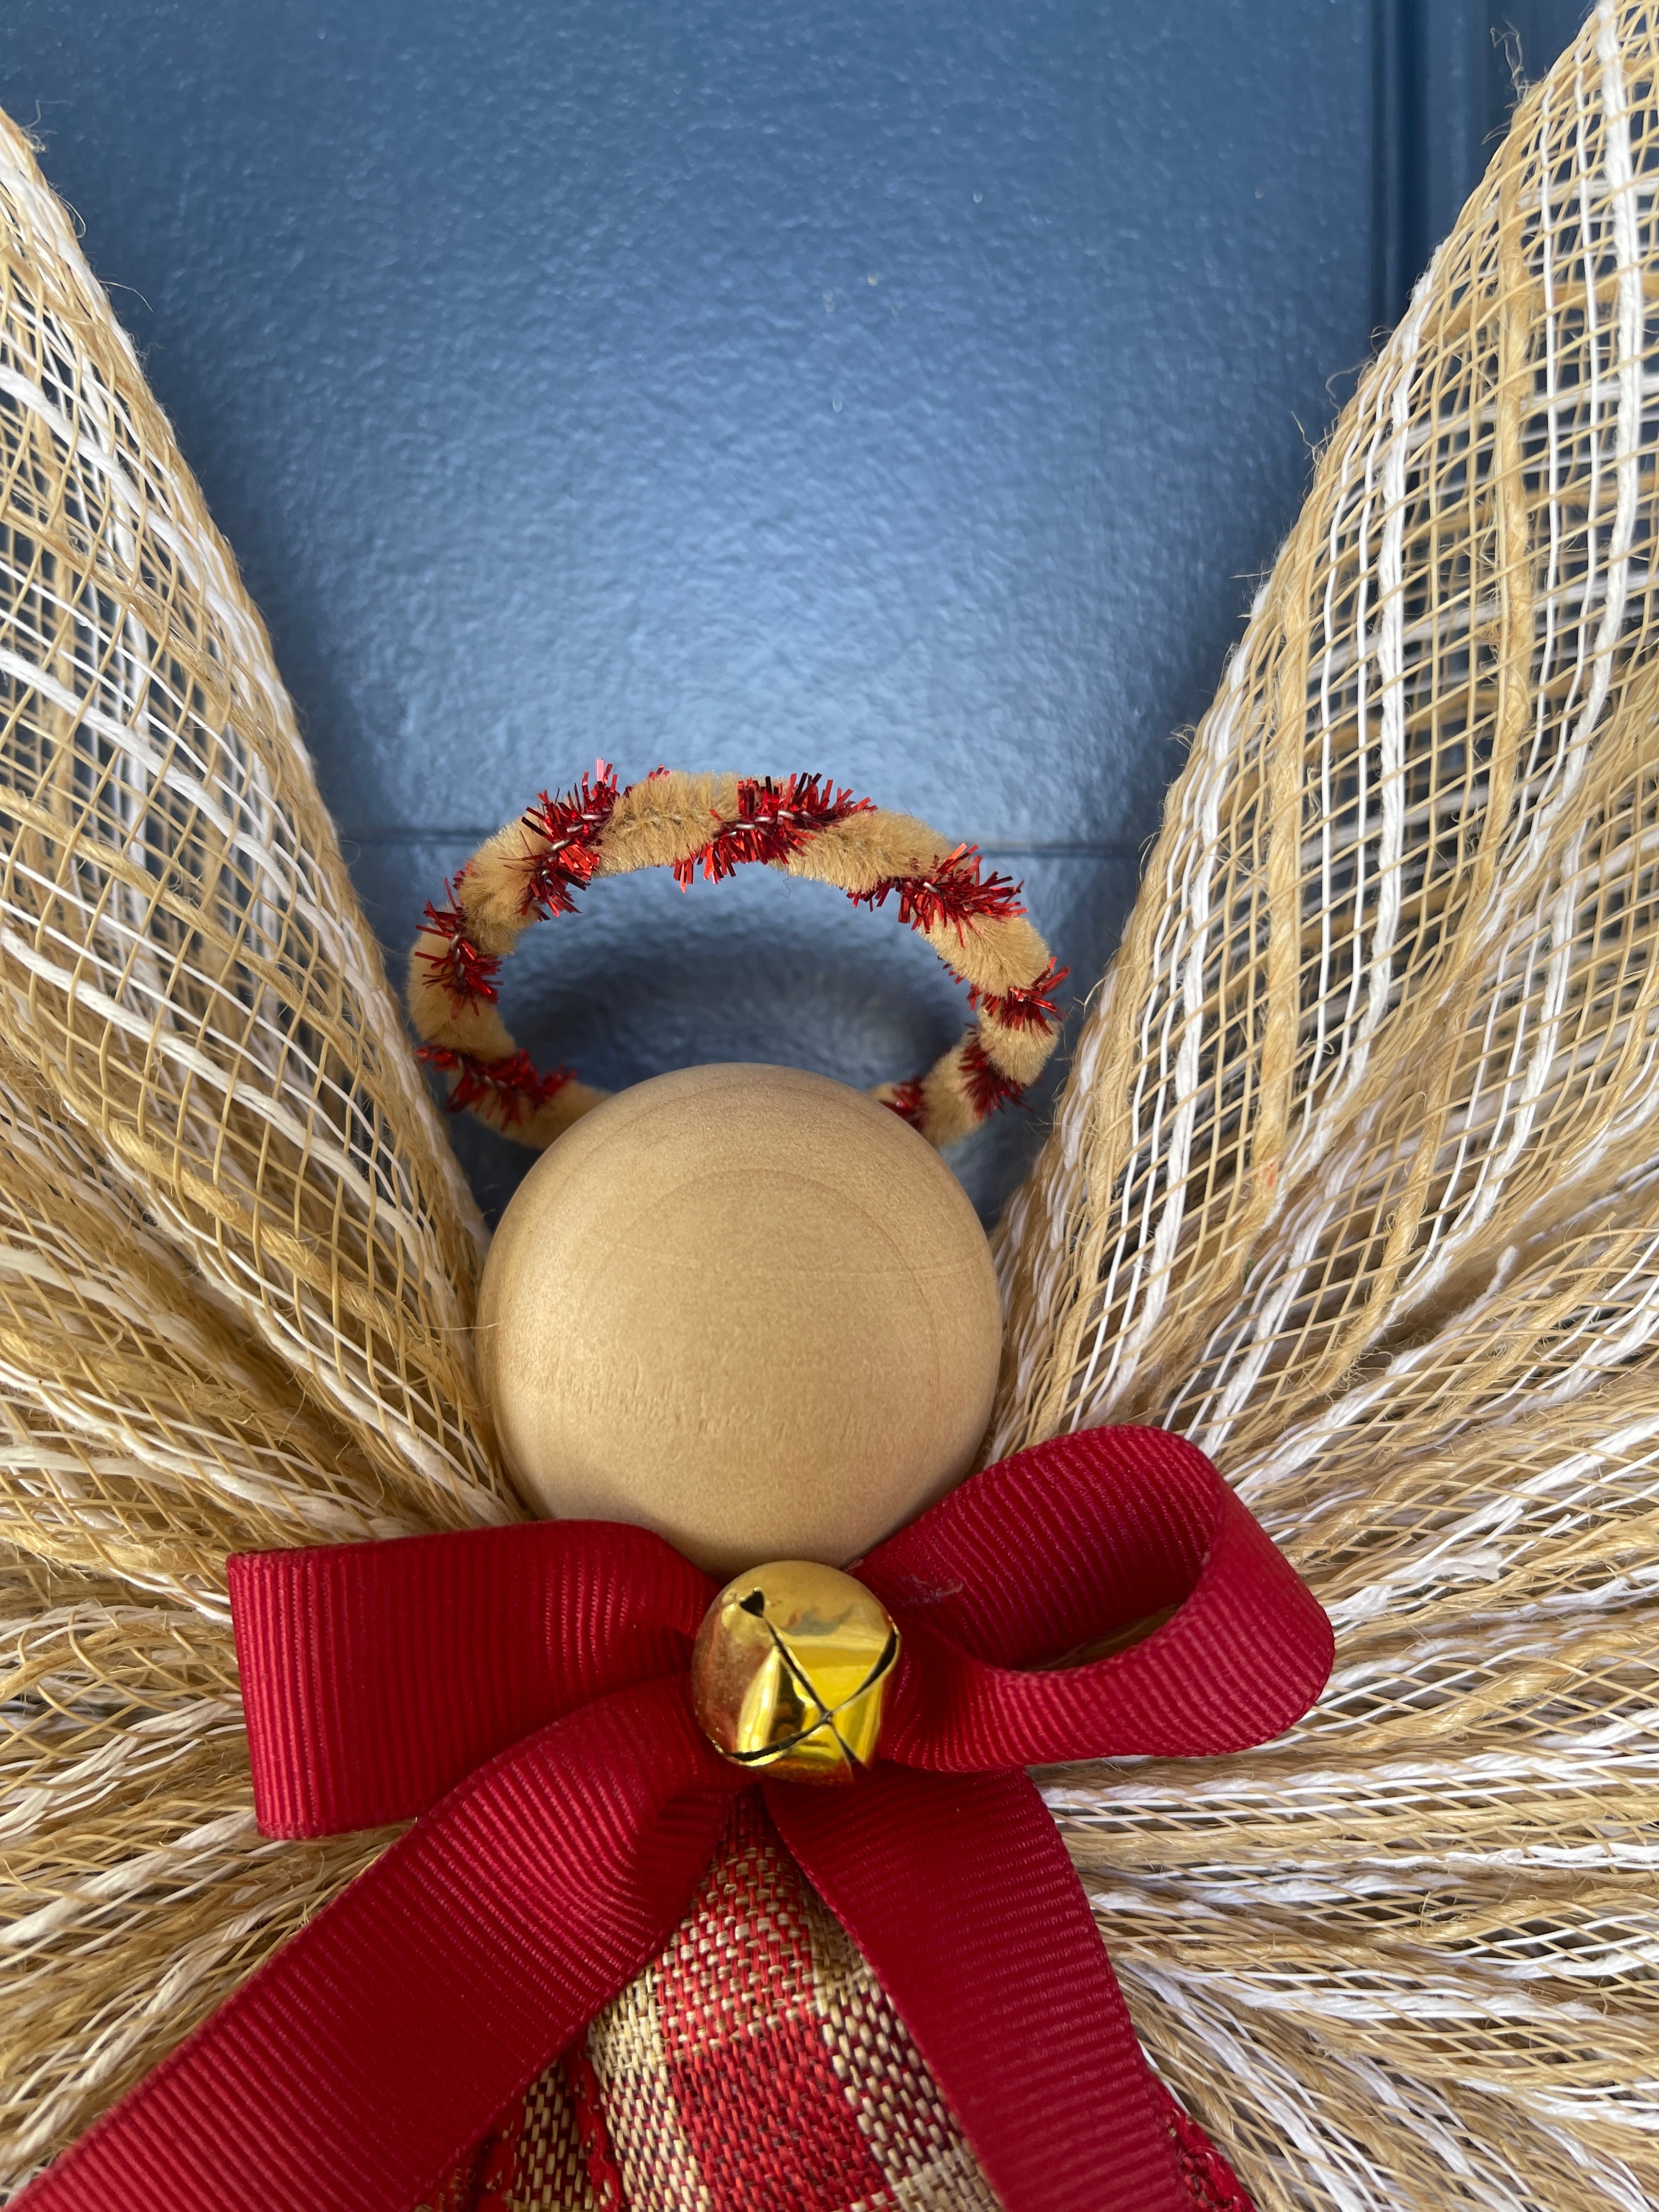 Close Up View of Wooden Head, with a Tan and Red Metallic Halo, Gold Bell on a Red Bow and Red and Tan Plaid Apron